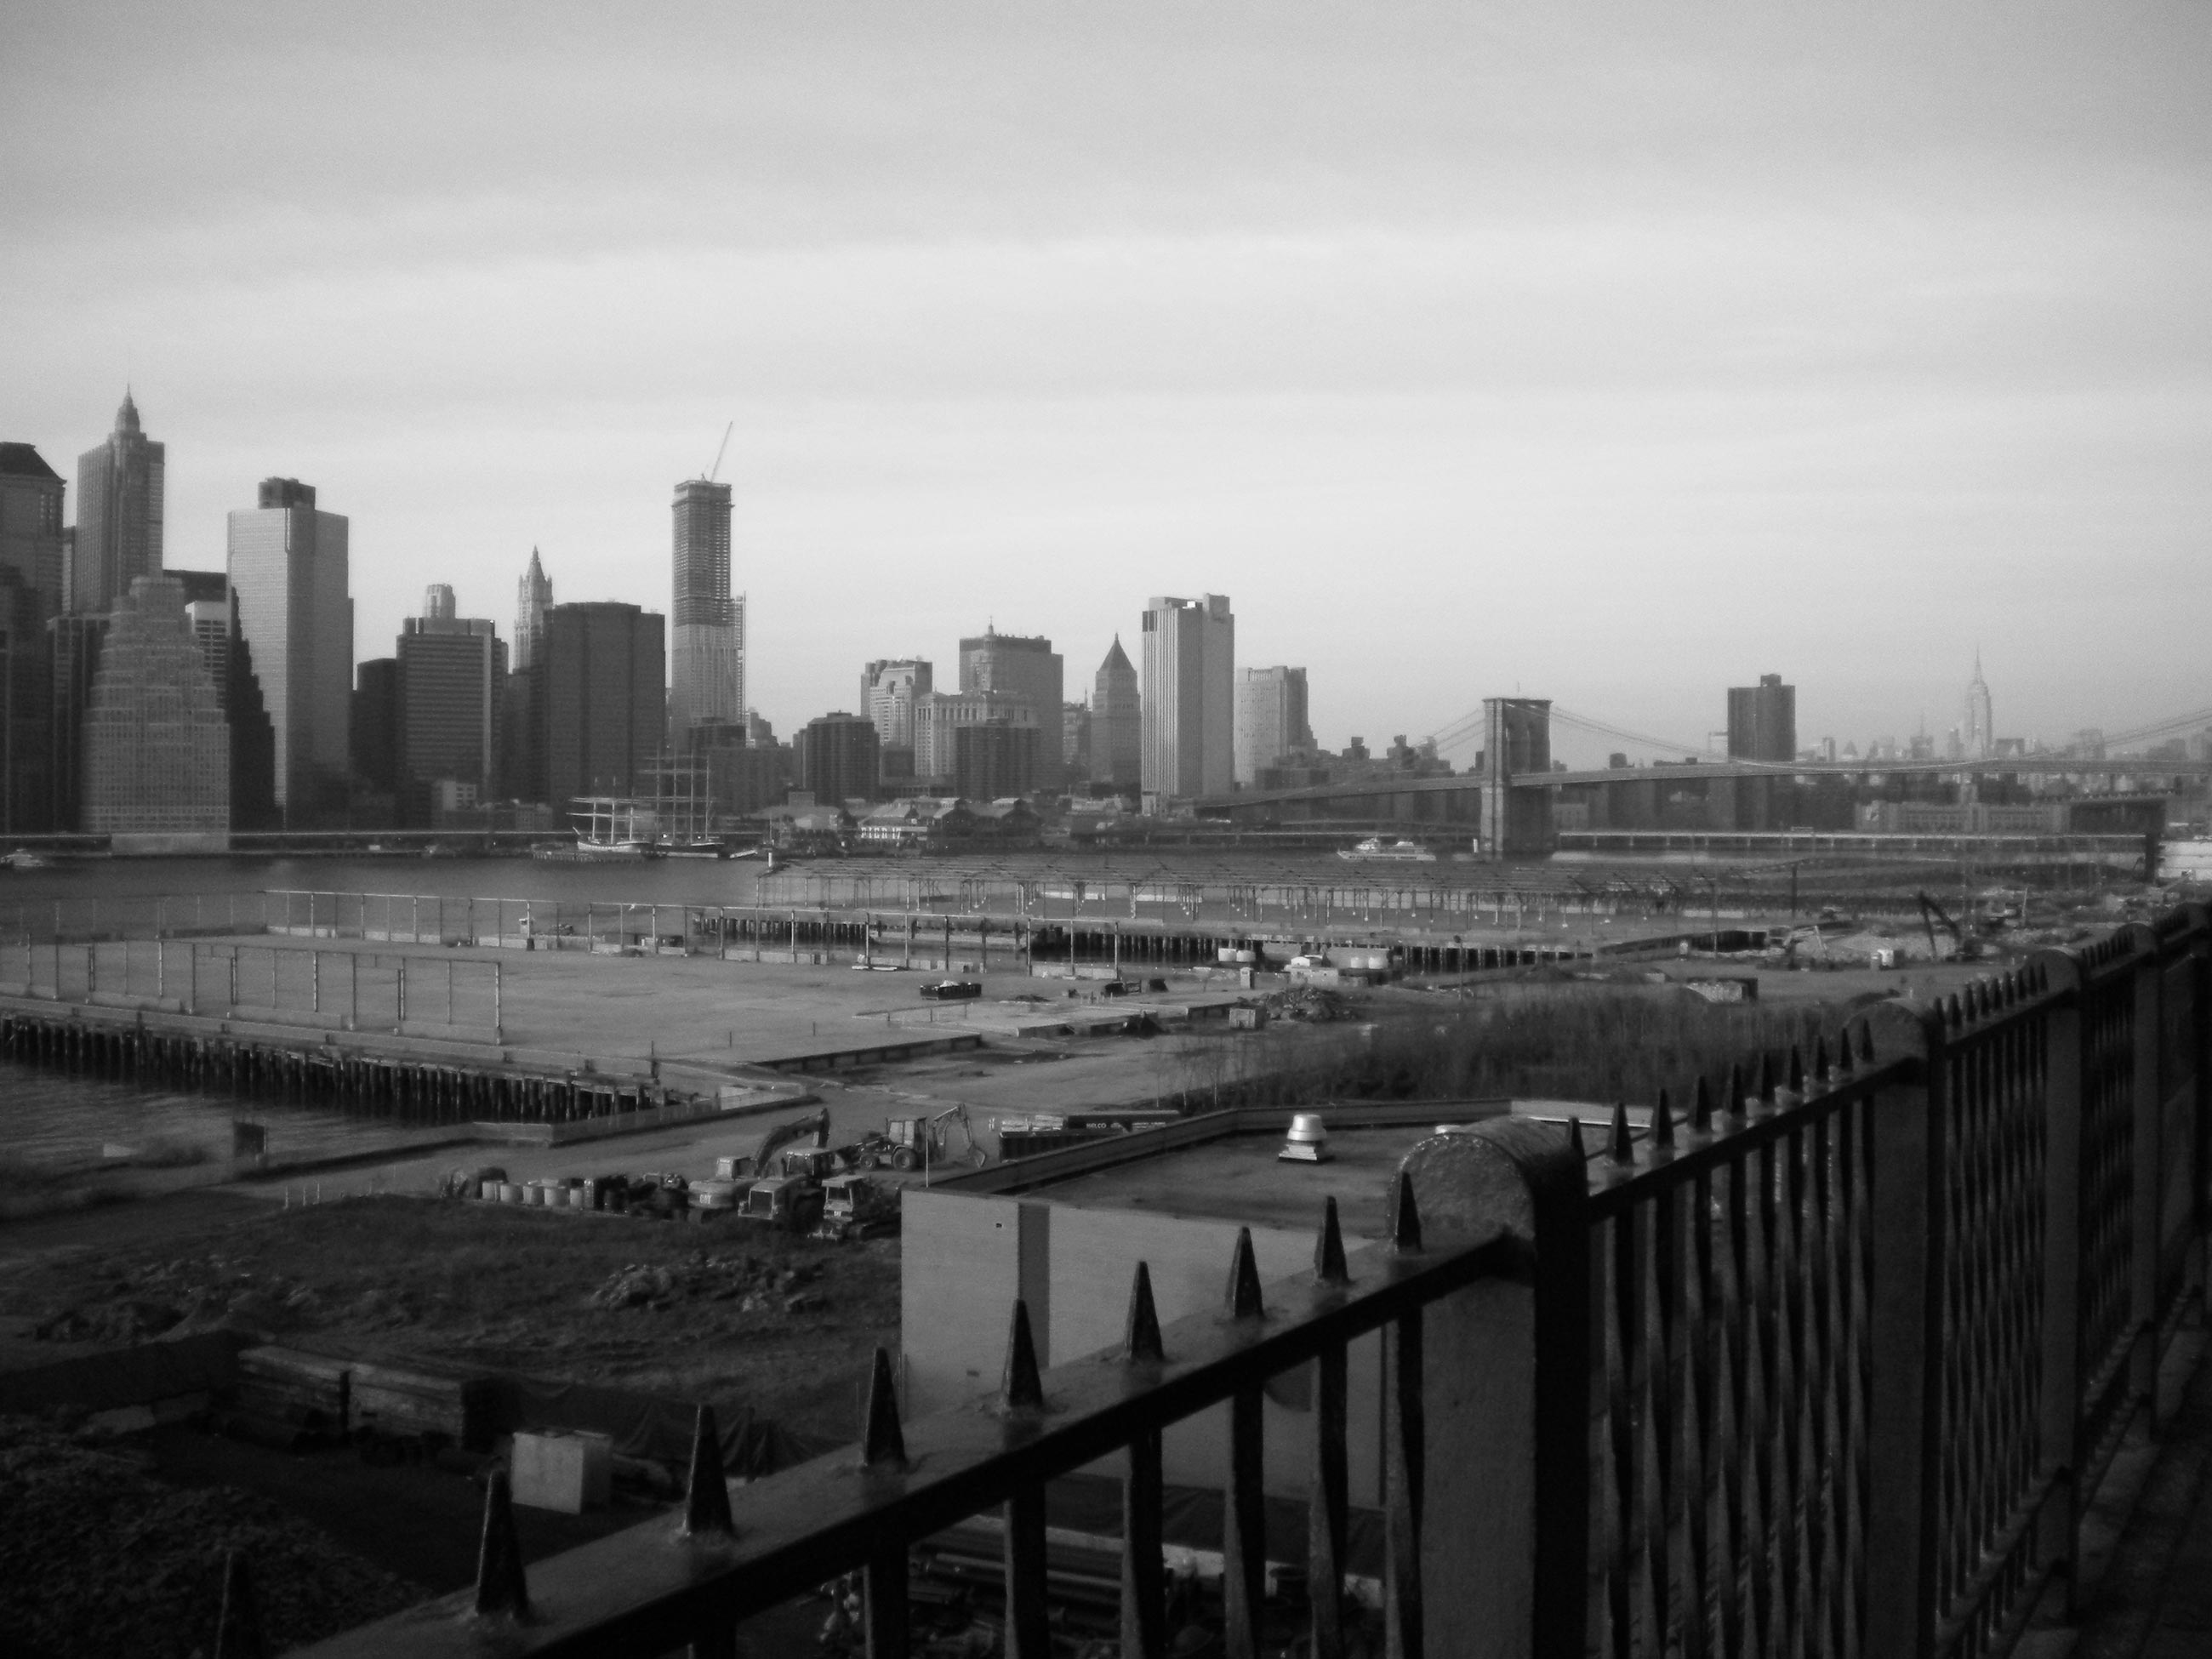 http://jrandomimage.com/images/view-from-brooklyn.jpg